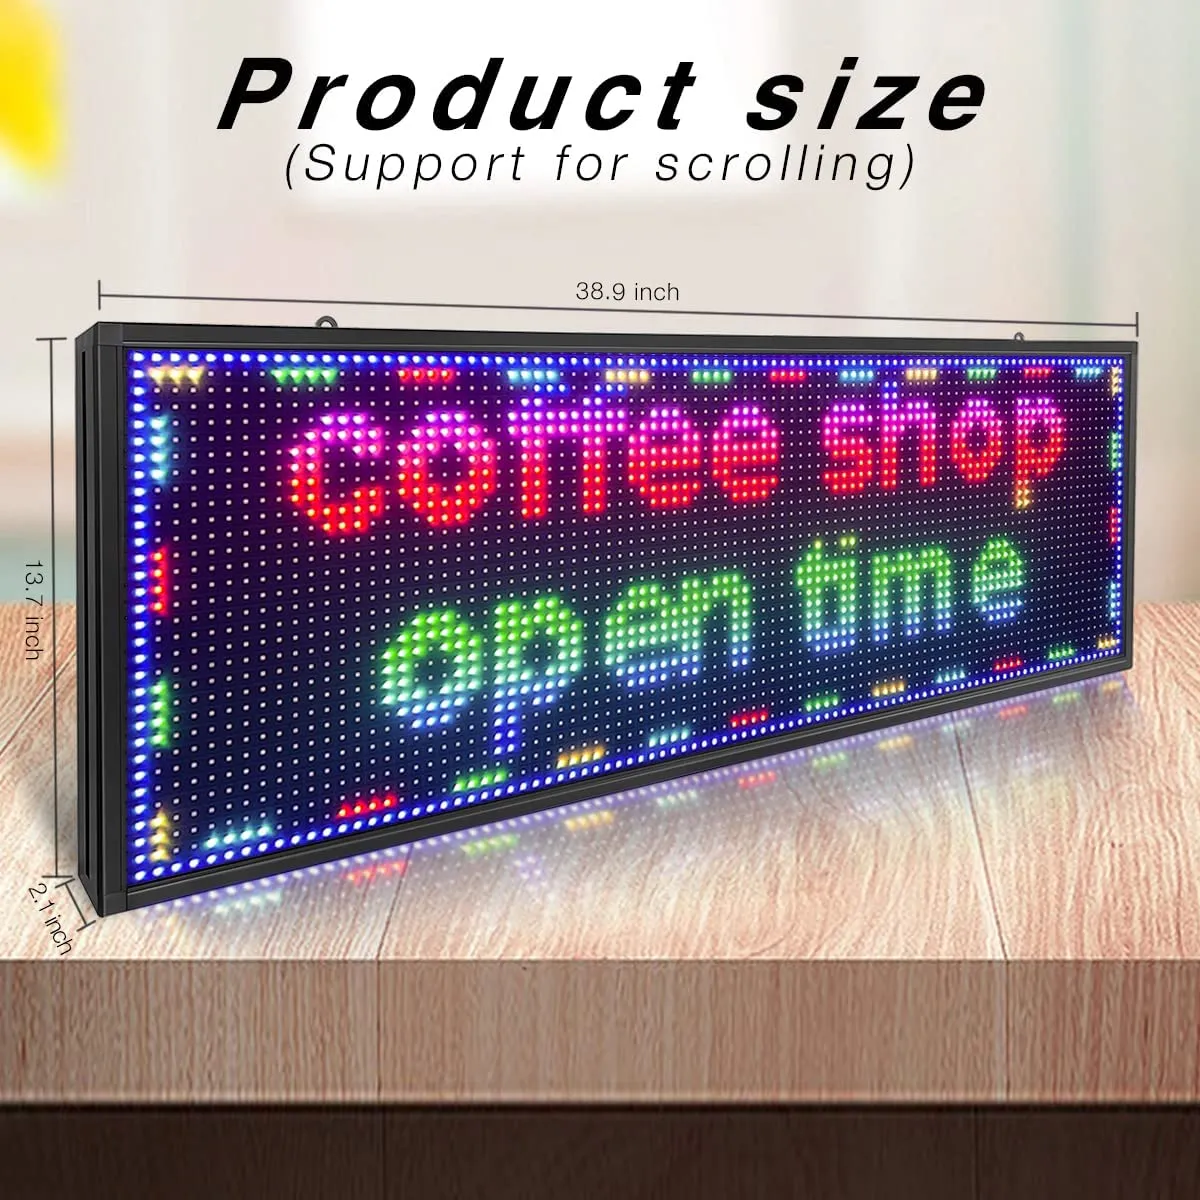 39 inch L x 14 inchH FULL COLOR RGB Programmable Led Sign With Scrolling Message Display High Brightness For P10 Outdoor WIFI Led Display For Store